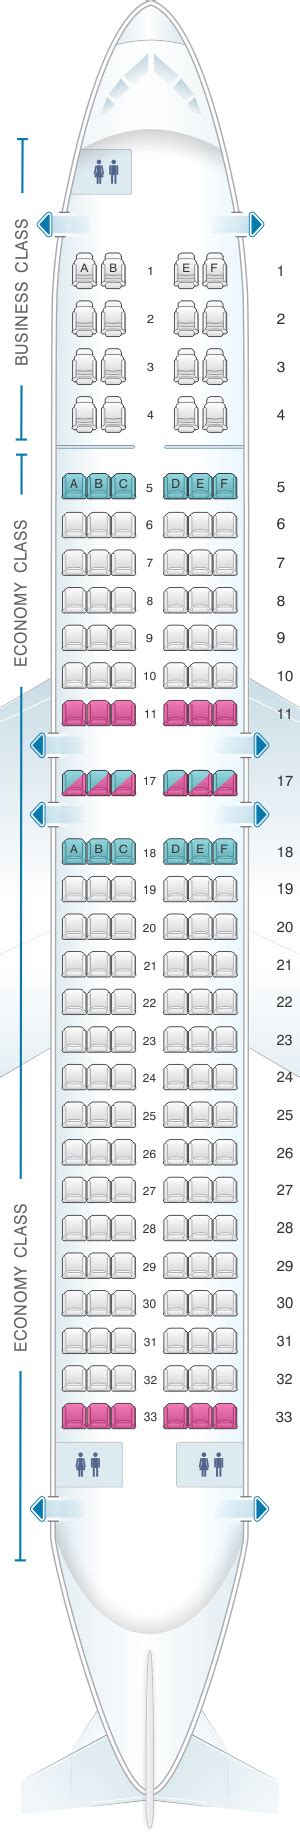 boeing 737-800 seating chart copa